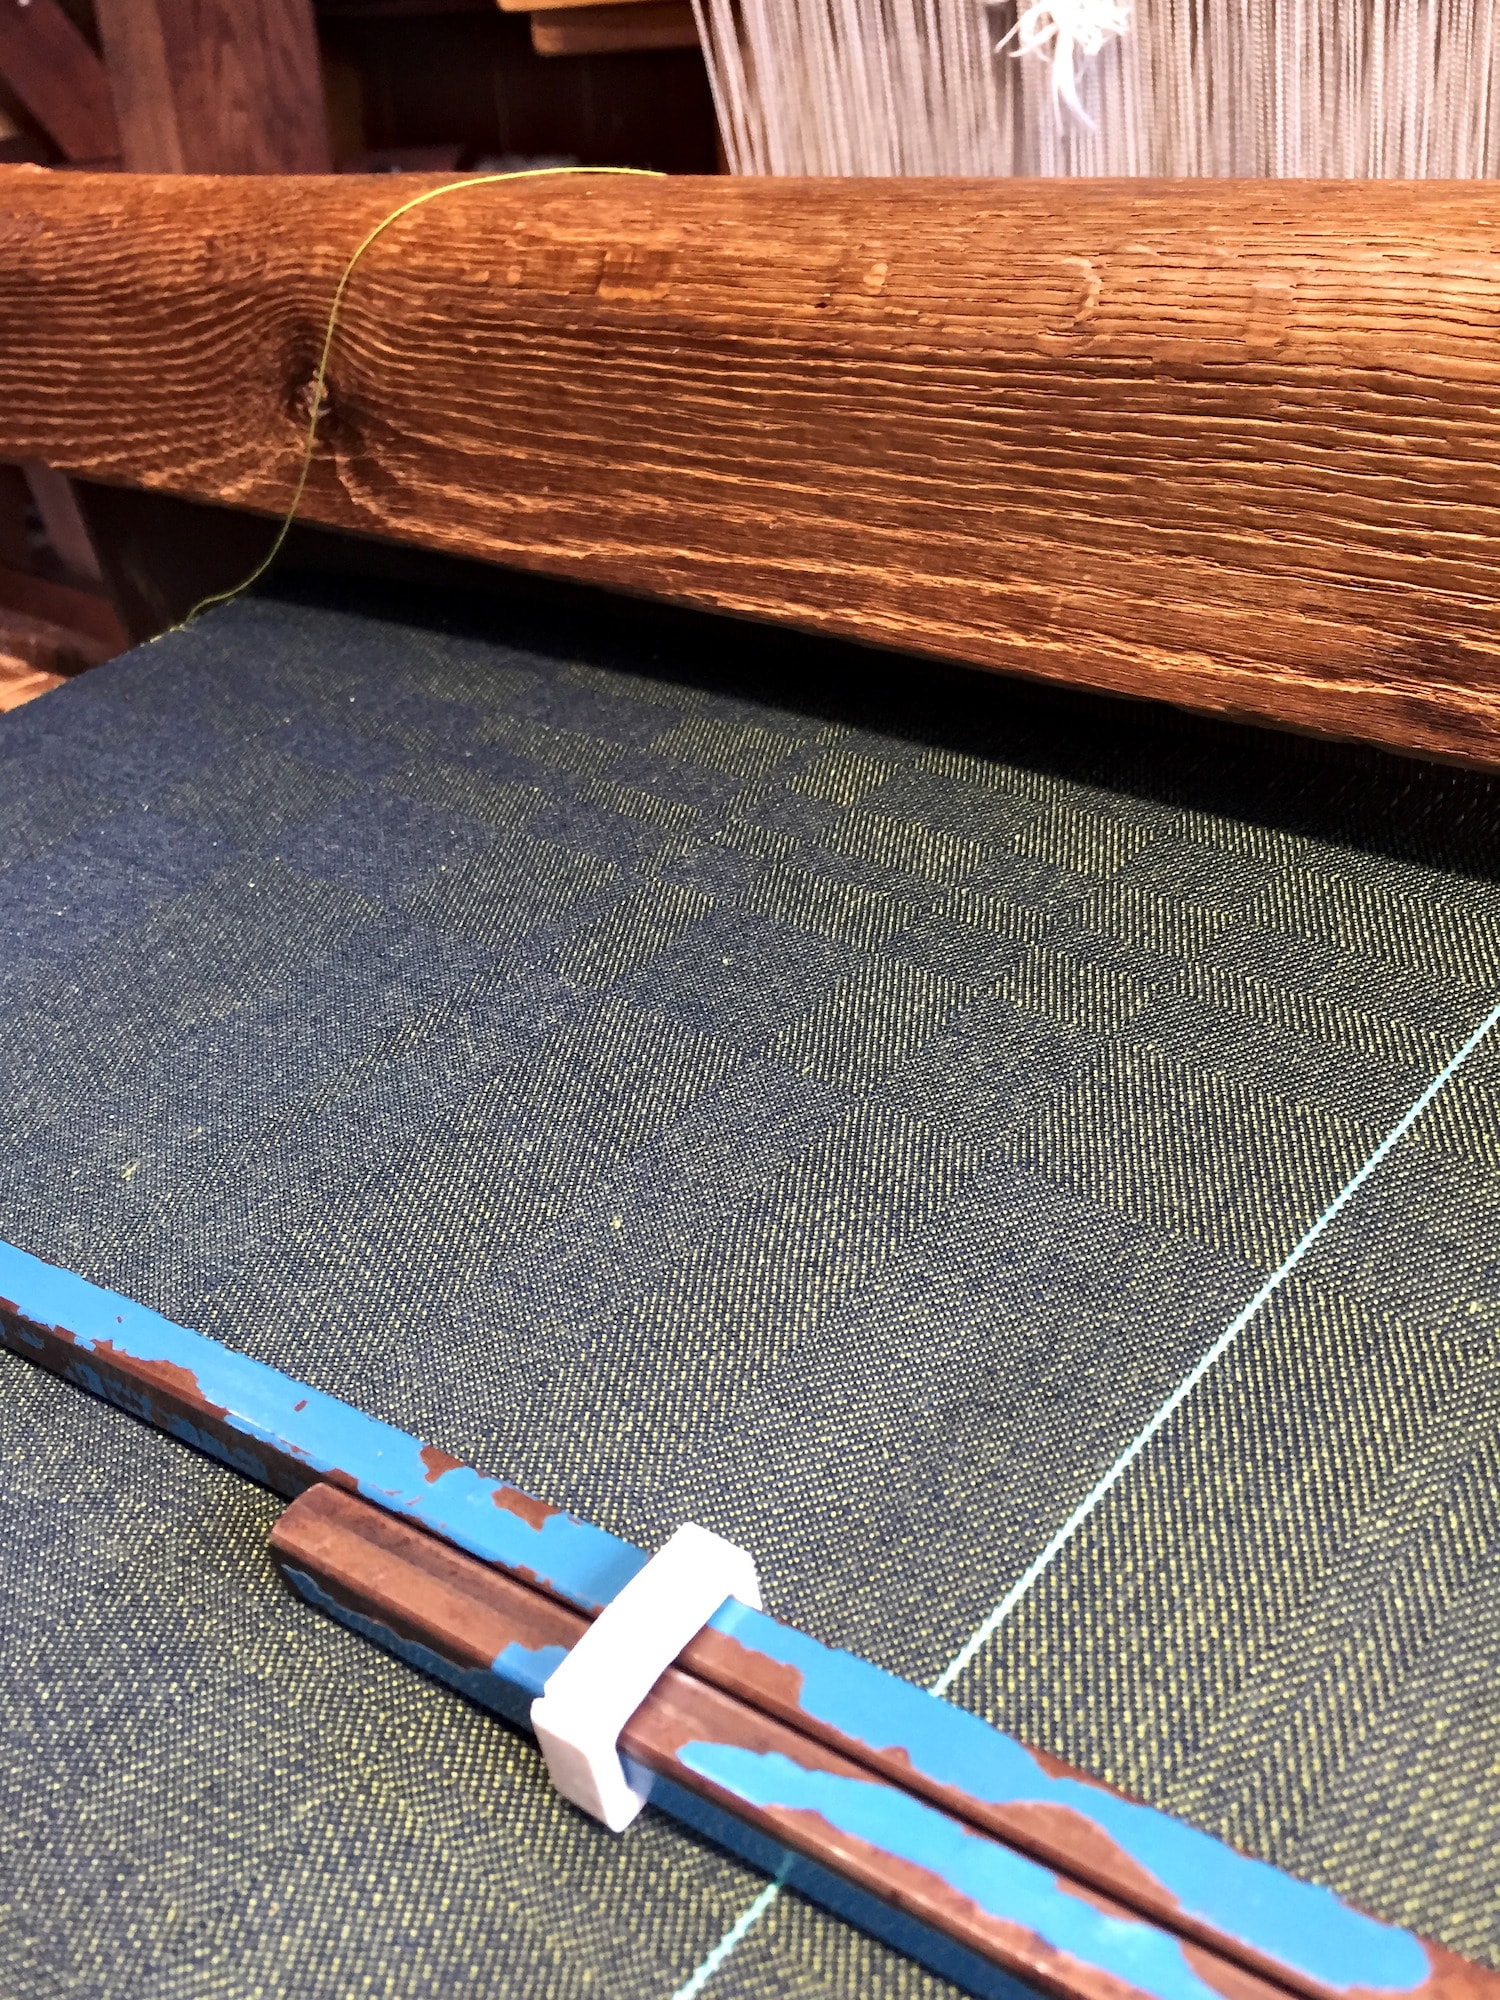 the cloth in progress on an old wooden loom. from this angle, it has blue squares slightly contrasting with more green squares.